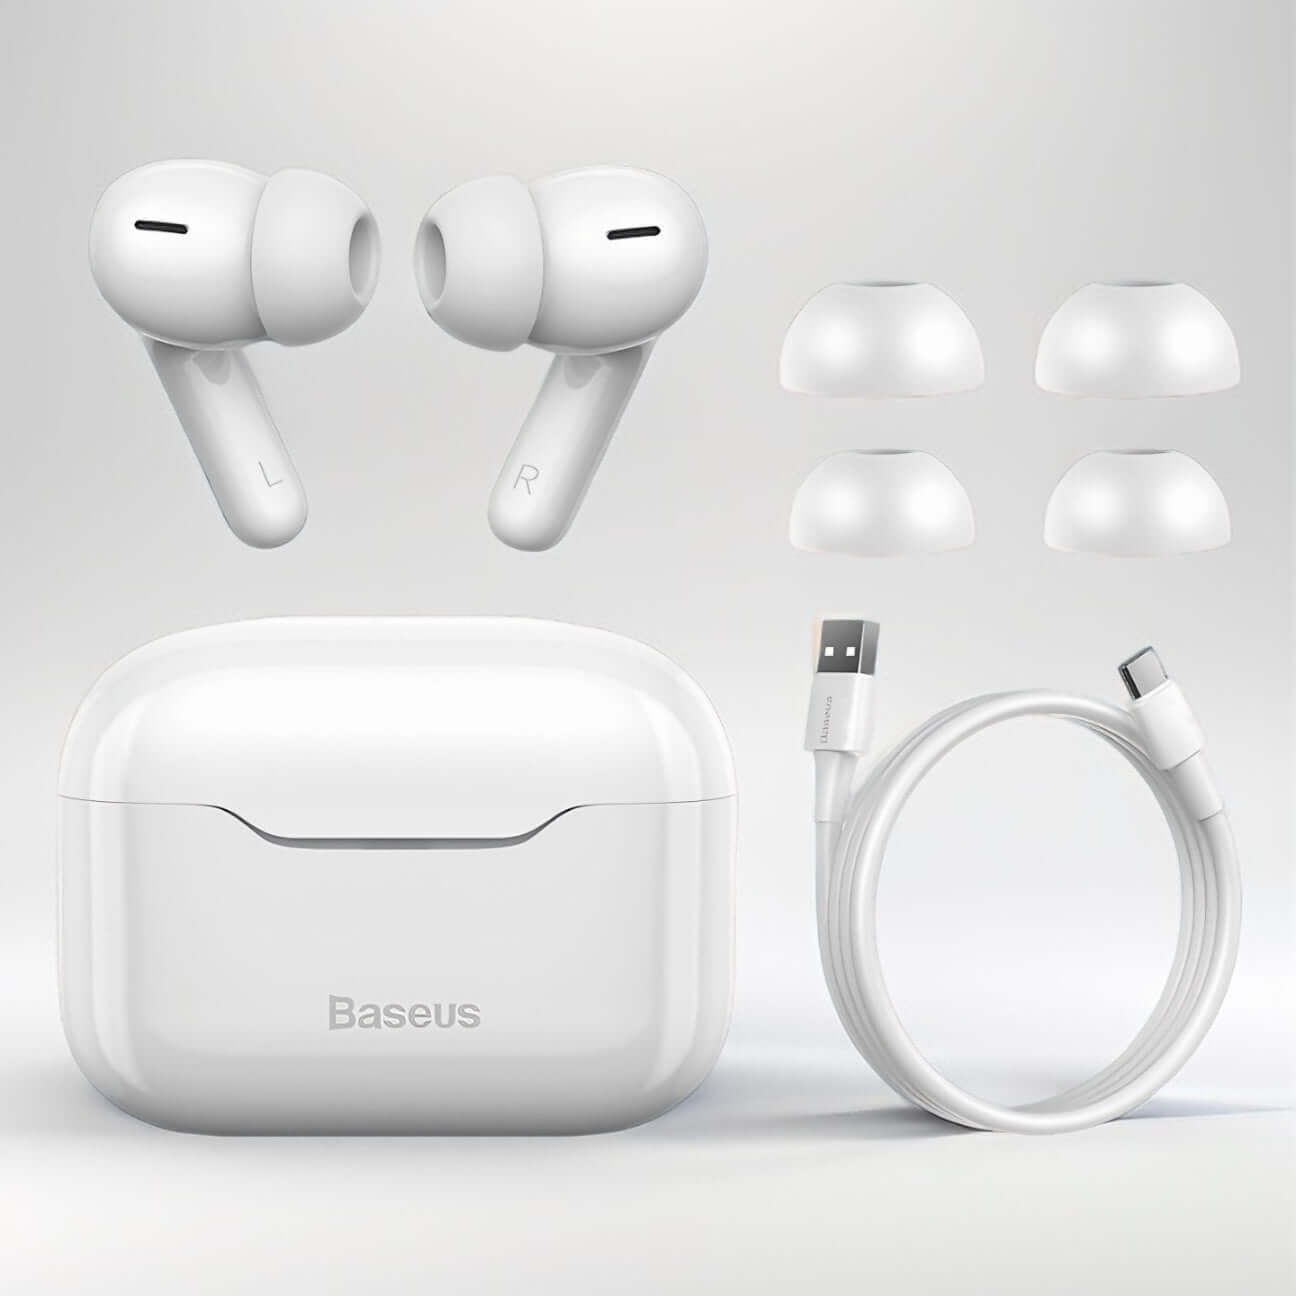 Premium Noise-Cancelling Wireless Earbuds | Dual Monaural Switching | Low Latency | Waterproof | Sound-activated | BT 5.0 | Baseus